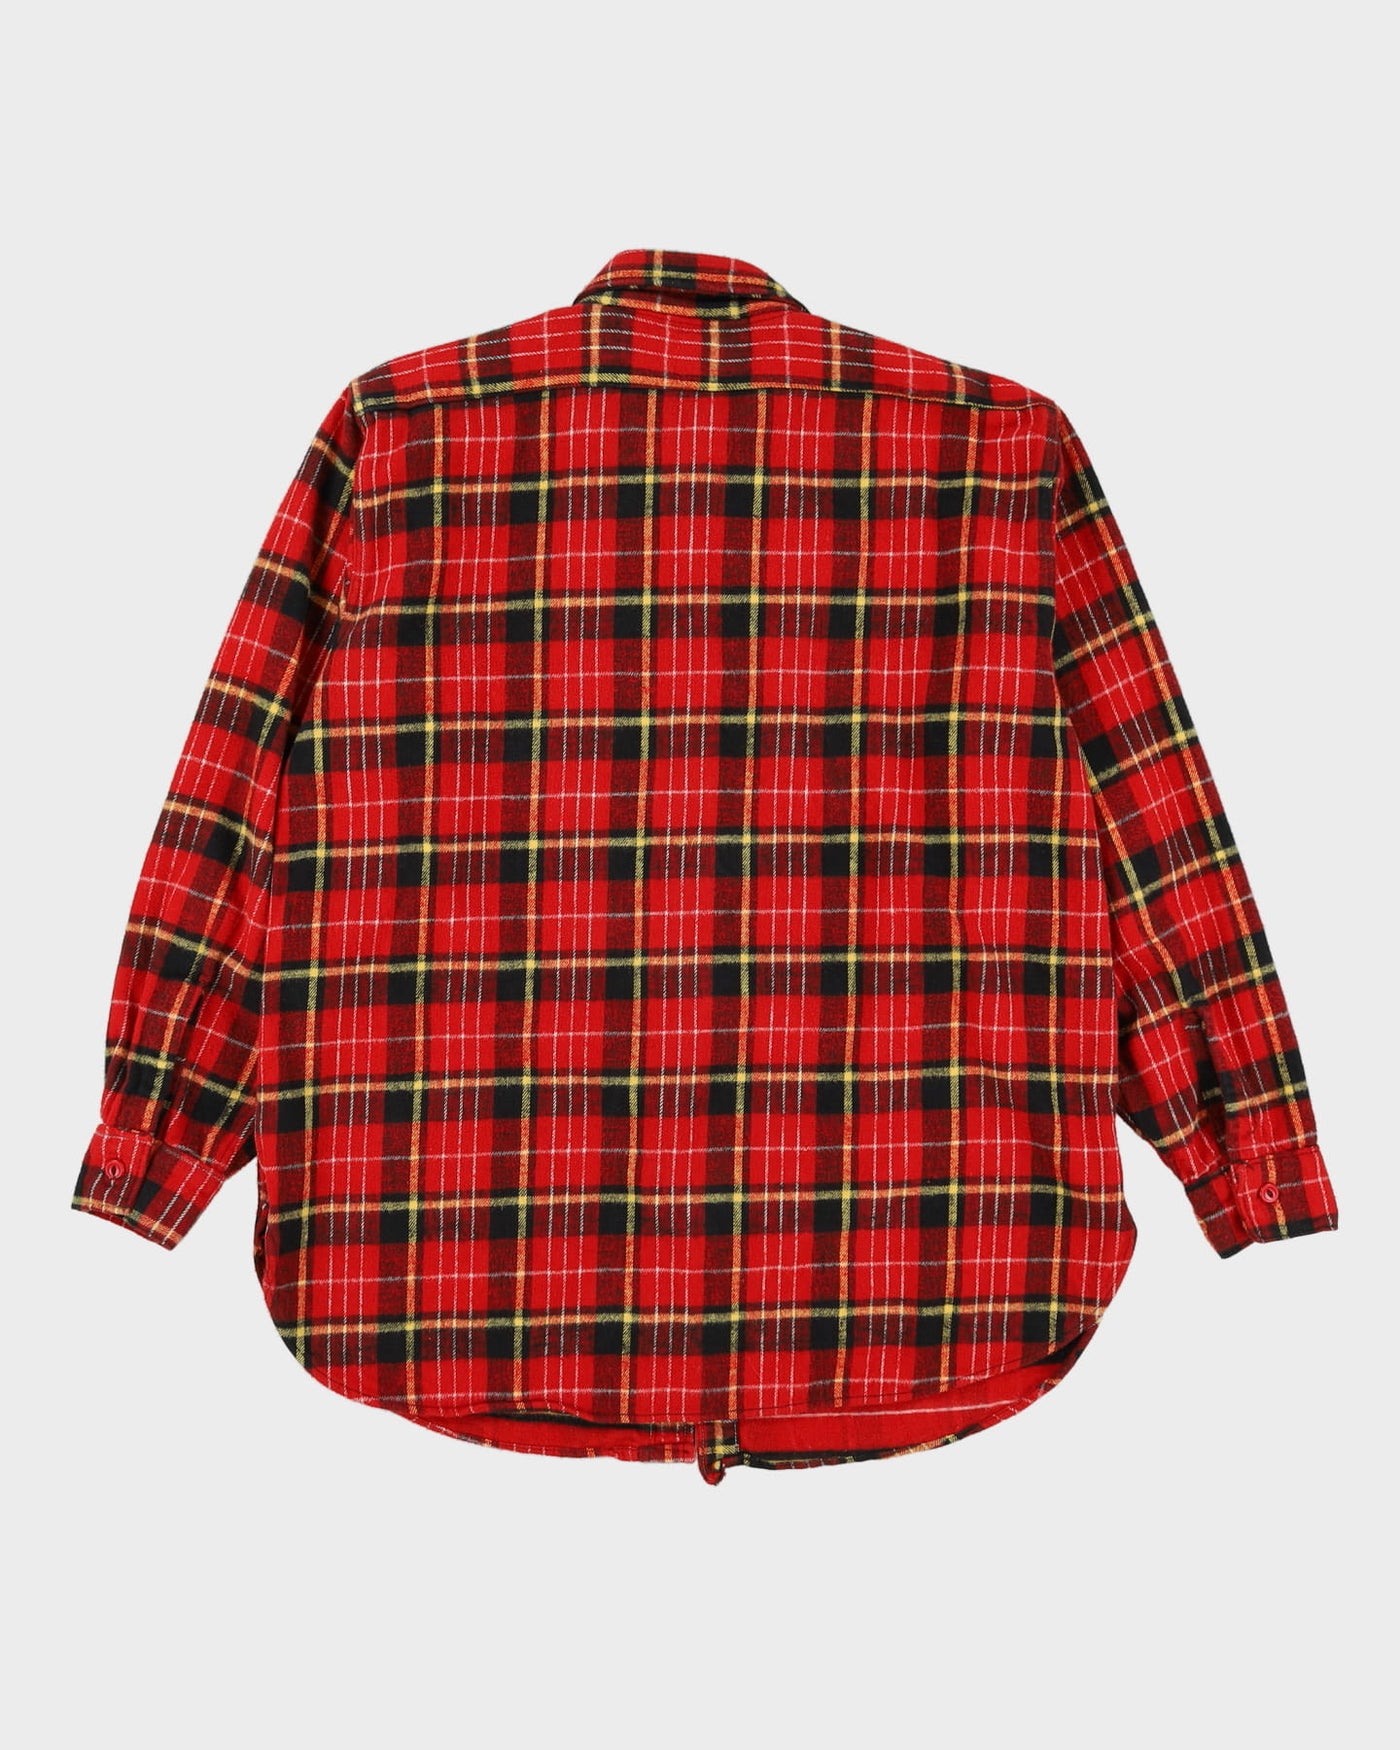 70s Murphy Made Red Long-Sleeve Check Flannel Shirt - L